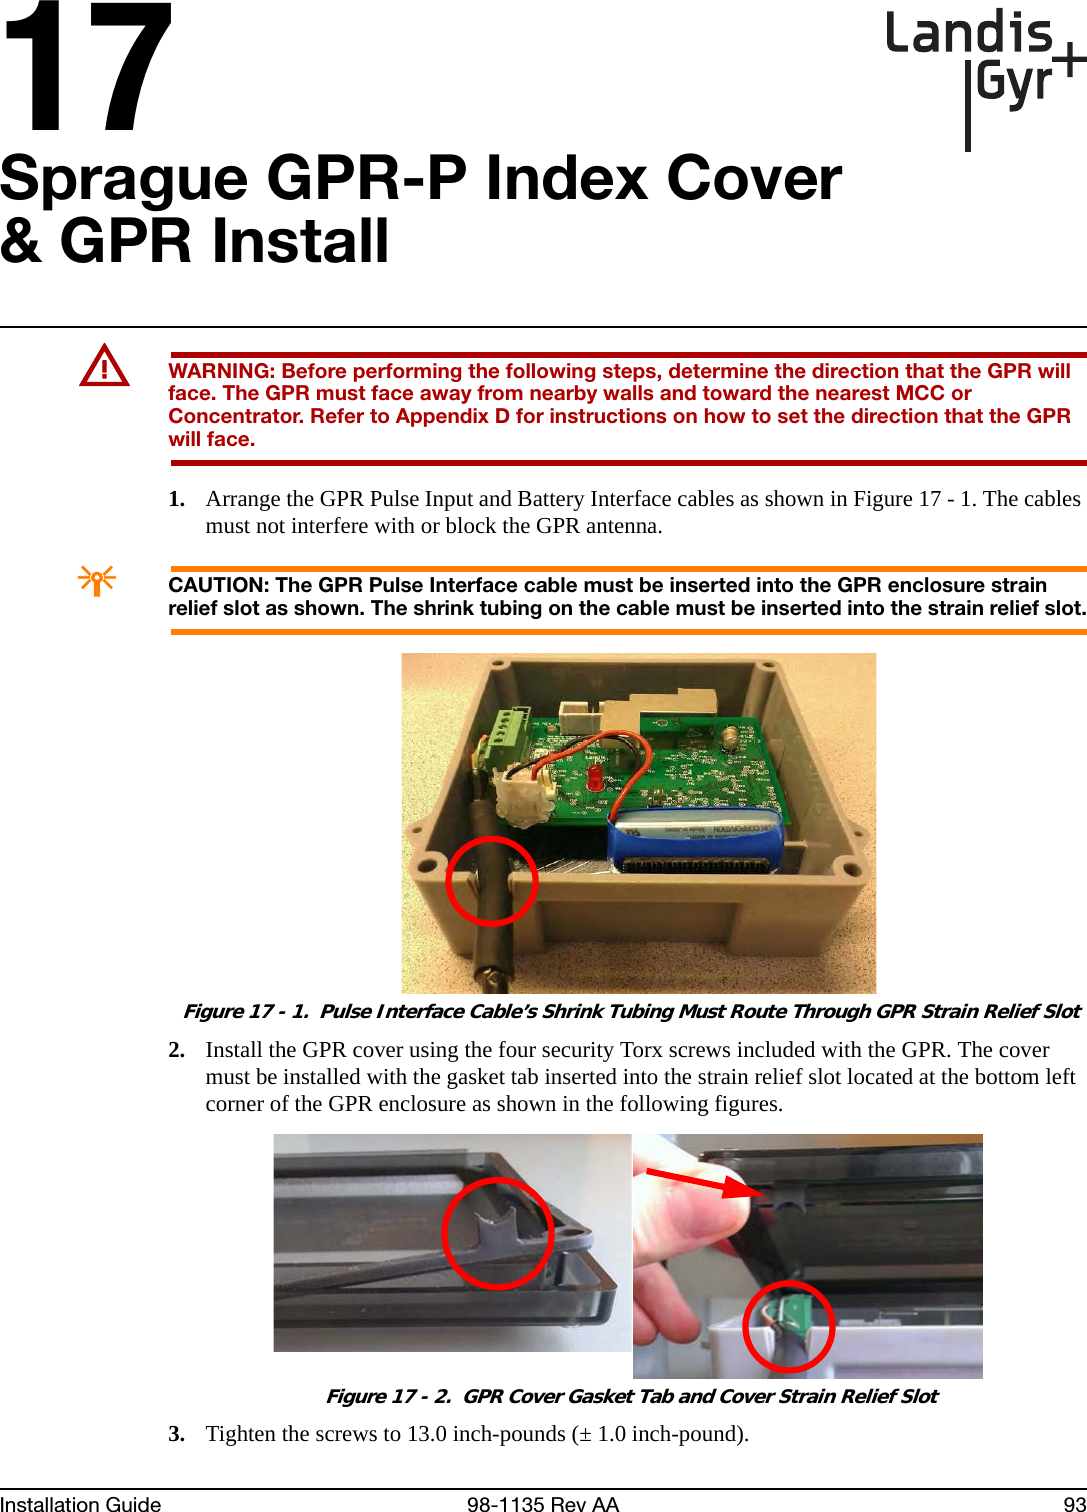 17Installation Guide 98-1135 Rev AA 93Sprague GPR-P Index Cover &amp; GPR InstallUWARNING: Before performing the following steps, determine the direction that the GPR will face. The GPR must face away from nearby walls and toward the nearest MCC or Concentrator. Refer to Appendix D for instructions on how to set the direction that the GPR will face.1. Arrange the GPR Pulse Input and Battery Interface cables as shown in Figure 17 - 1. The cables must not interfere with or block the GPR antenna.ACAUTION: The GPR Pulse Interface cable must be inserted into the GPR enclosure strain relief slot as shown. The shrink tubing on the cable must be inserted into the strain relief slot. Figure 17 - 1.  Pulse Interface Cable’s Shrink Tubing Must Route Through GPR Strain Relief Slot2. Install the GPR cover using the four security Torx screws included with the GPR. The cover must be installed with the gasket tab inserted into the strain relief slot located at the bottom left corner of the GPR enclosure as shown in the following figures.  Figure 17 - 2.  GPR Cover Gasket Tab and Cover Strain Relief Slot3. Tighten the screws to 13.0 inch-pounds (± 1.0 inch-pound).